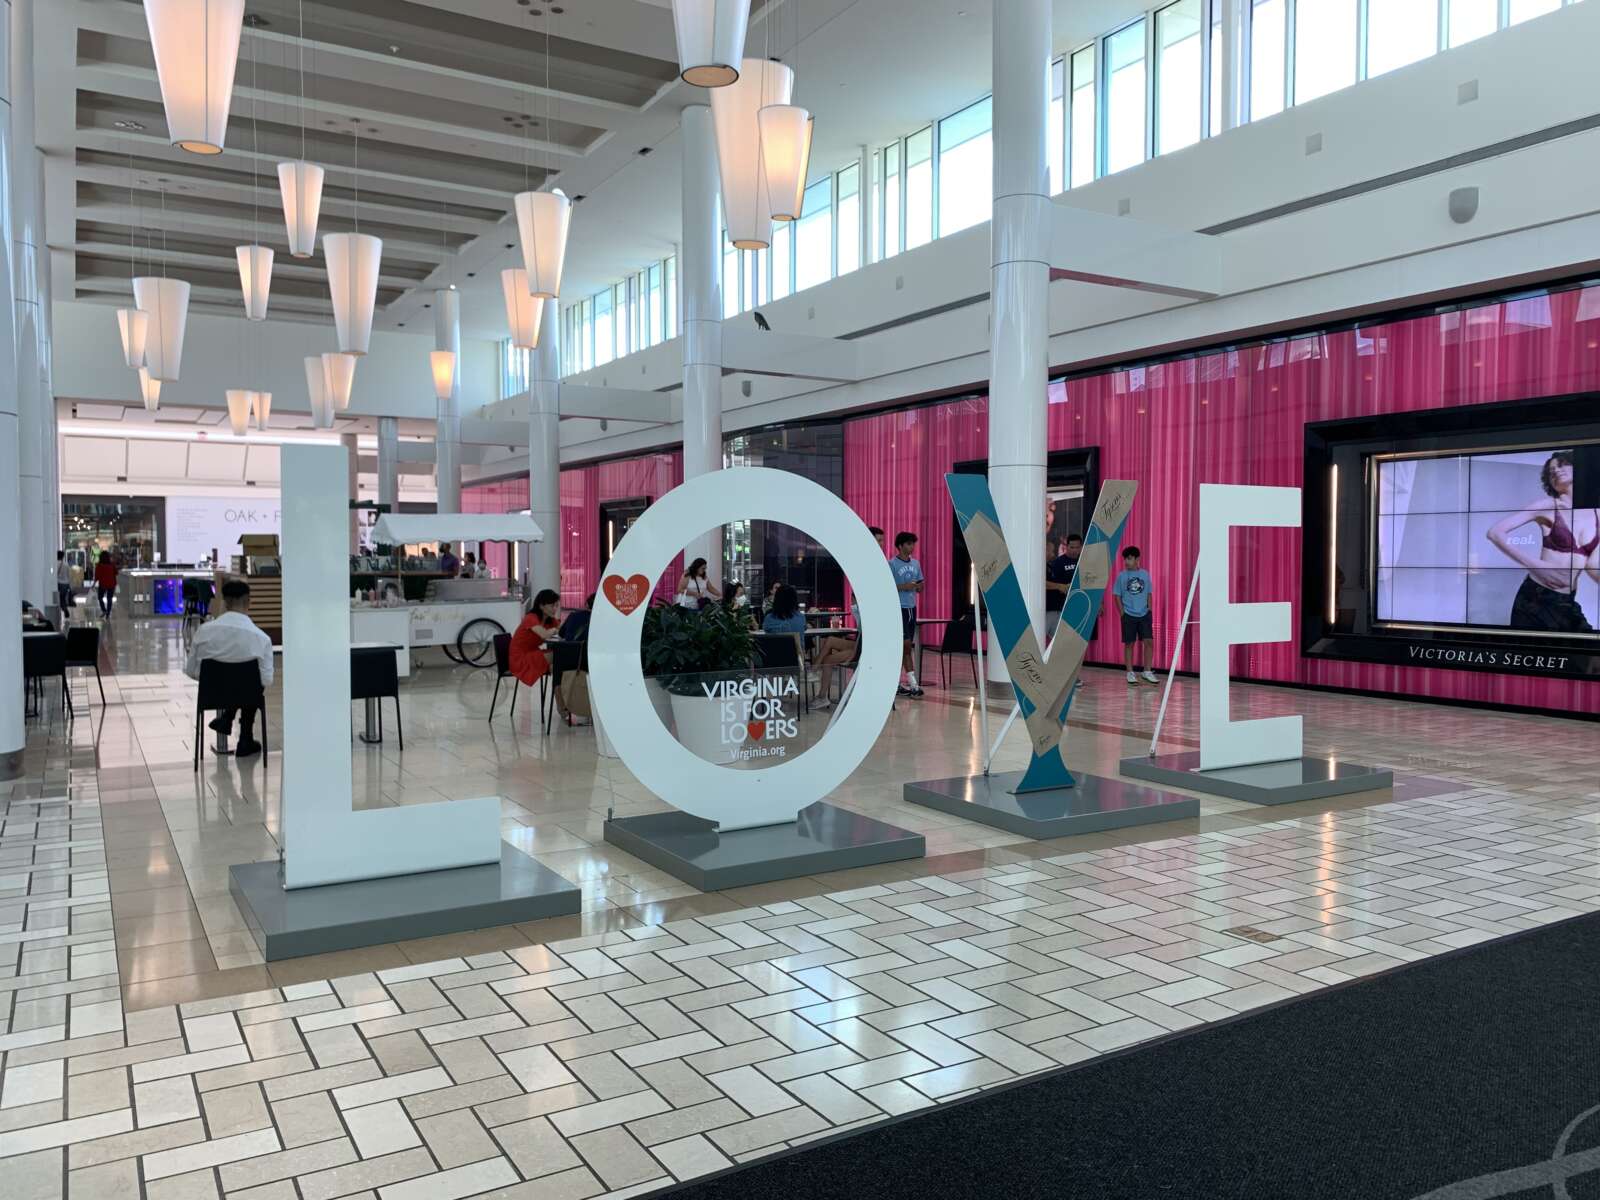 Shopping Malls in Virginia - Virginia is for Lovers